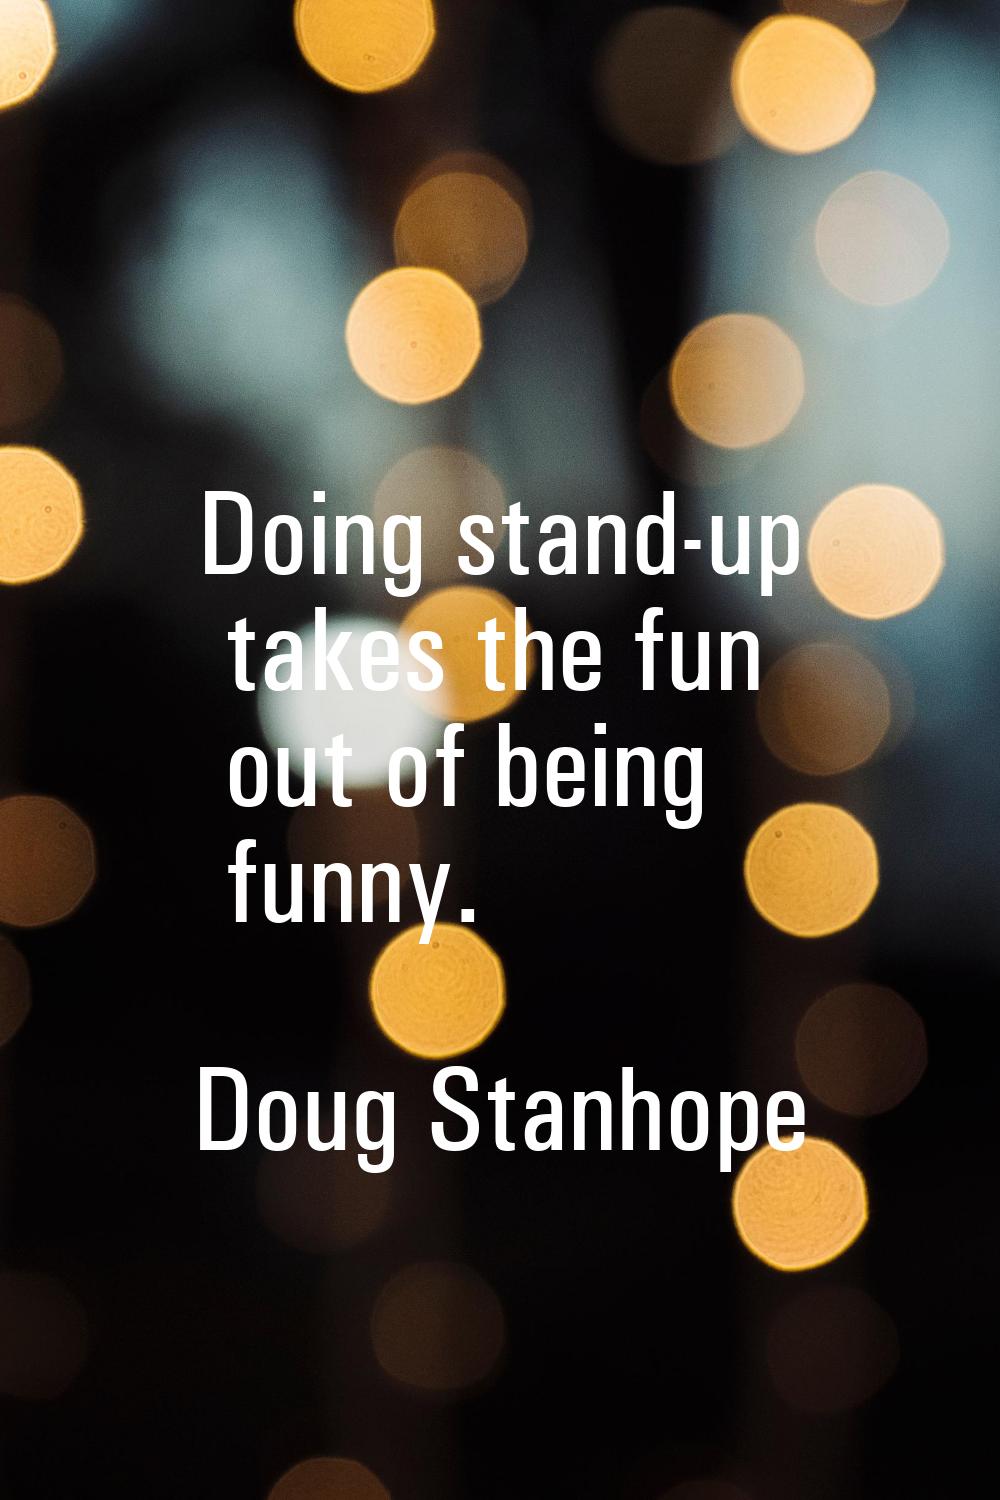 Doing stand-up takes the fun out of being funny.